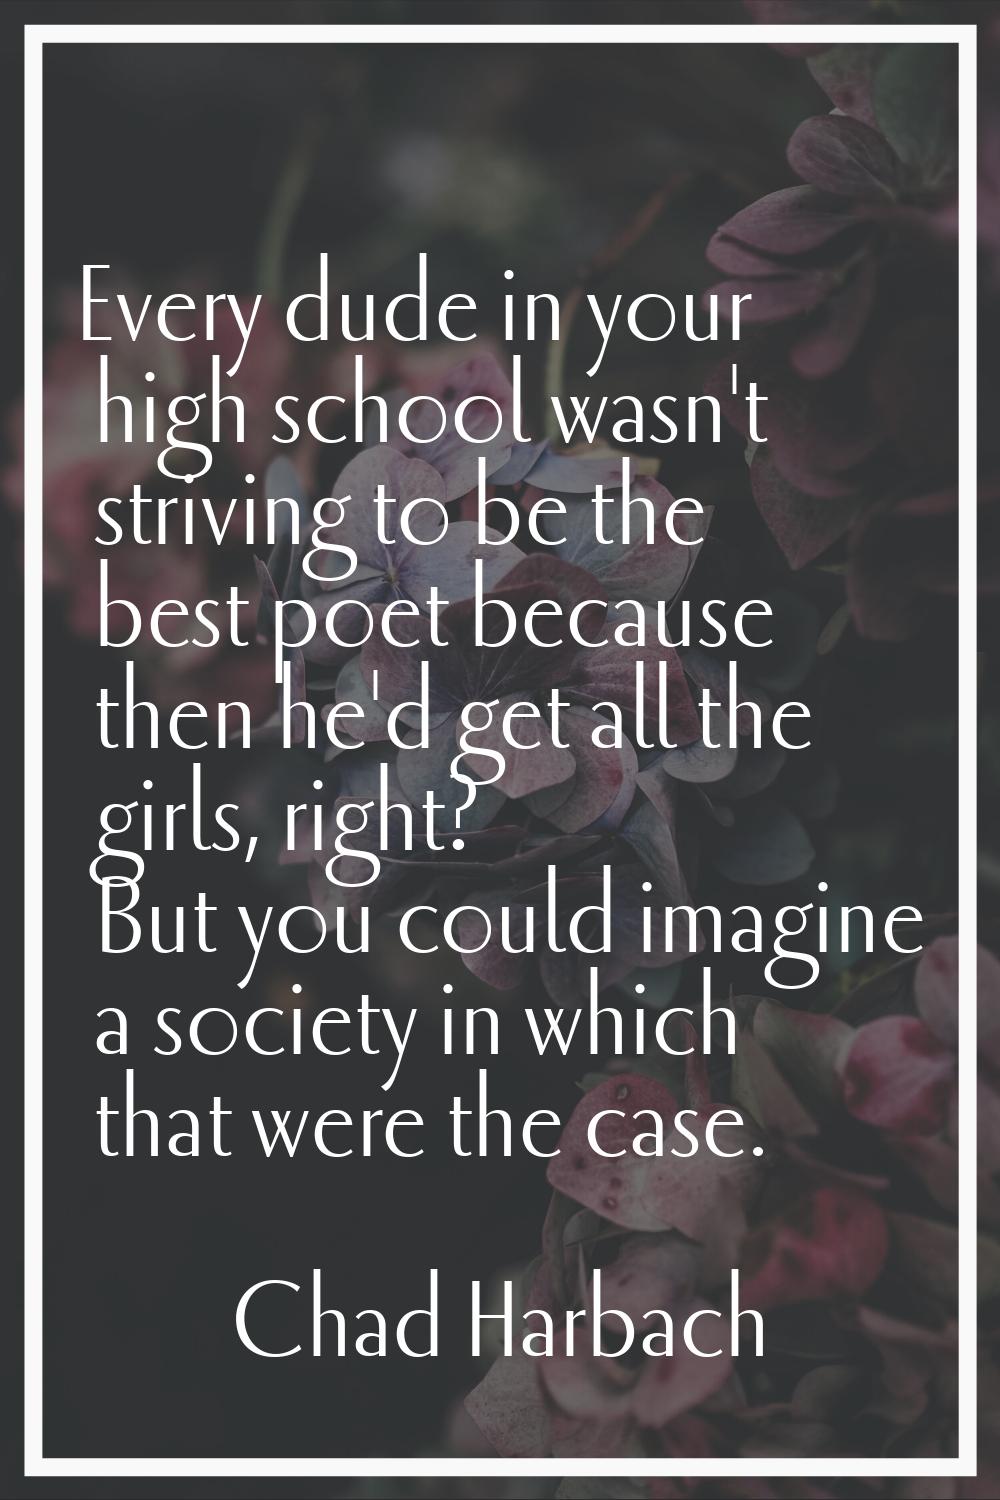 Every dude in your high school wasn't striving to be the best poet because then he'd get all the gi